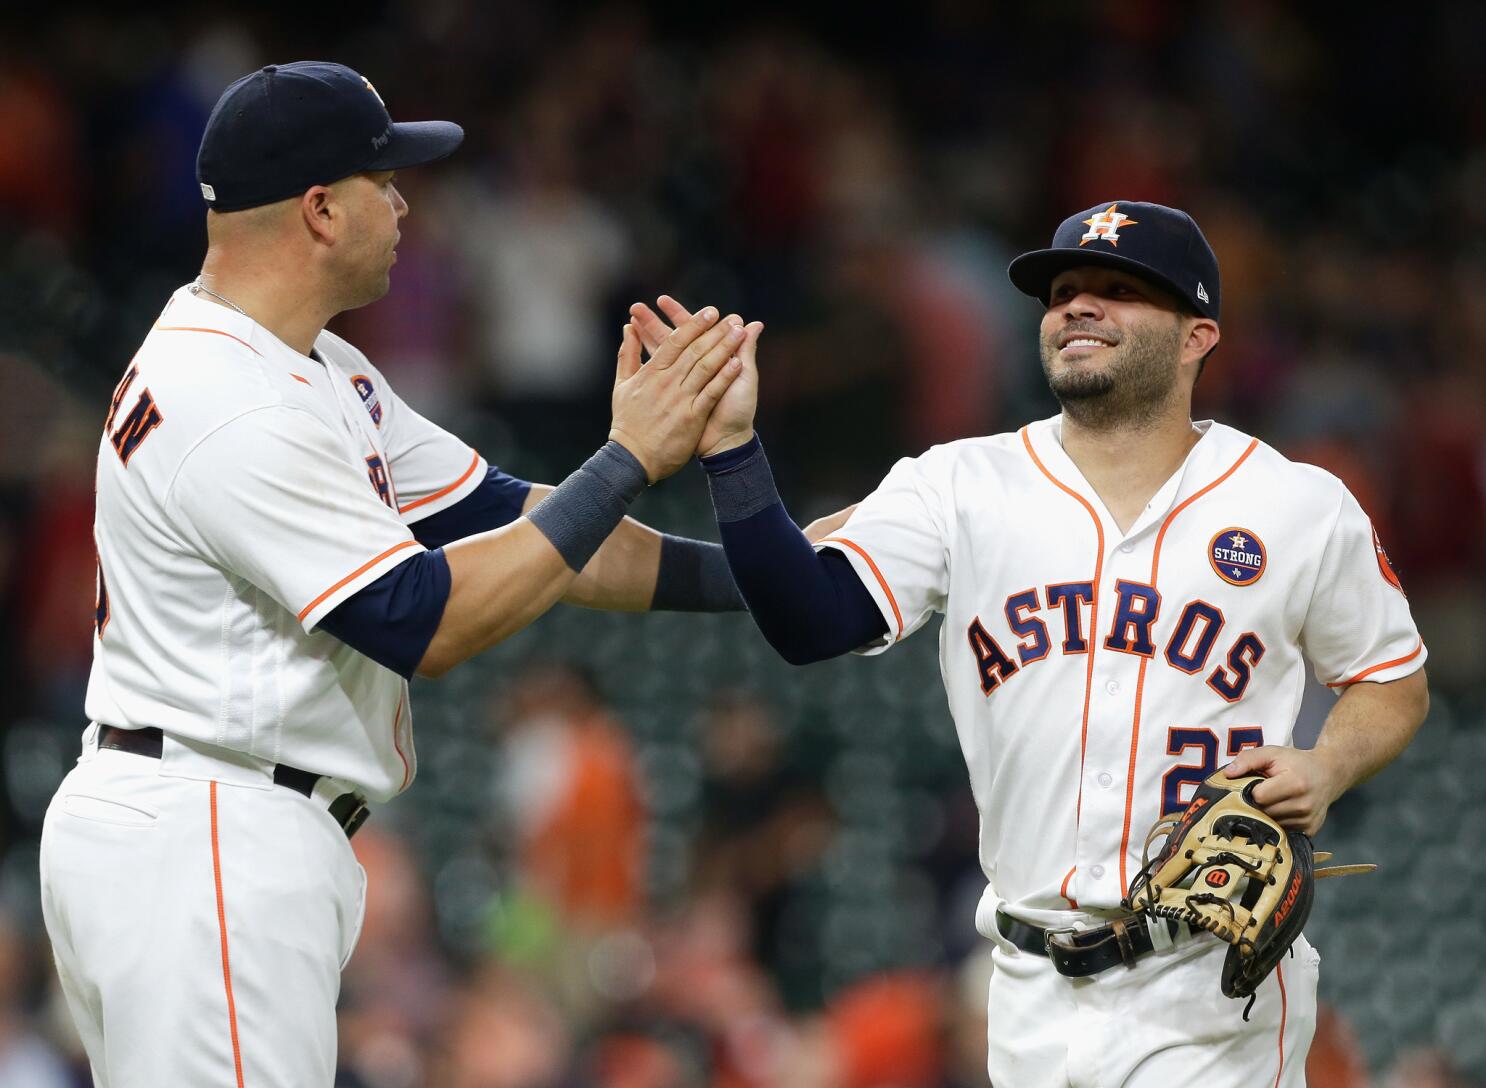 We've Got A New Photo Of Jose Altuve Next To Someone Tall